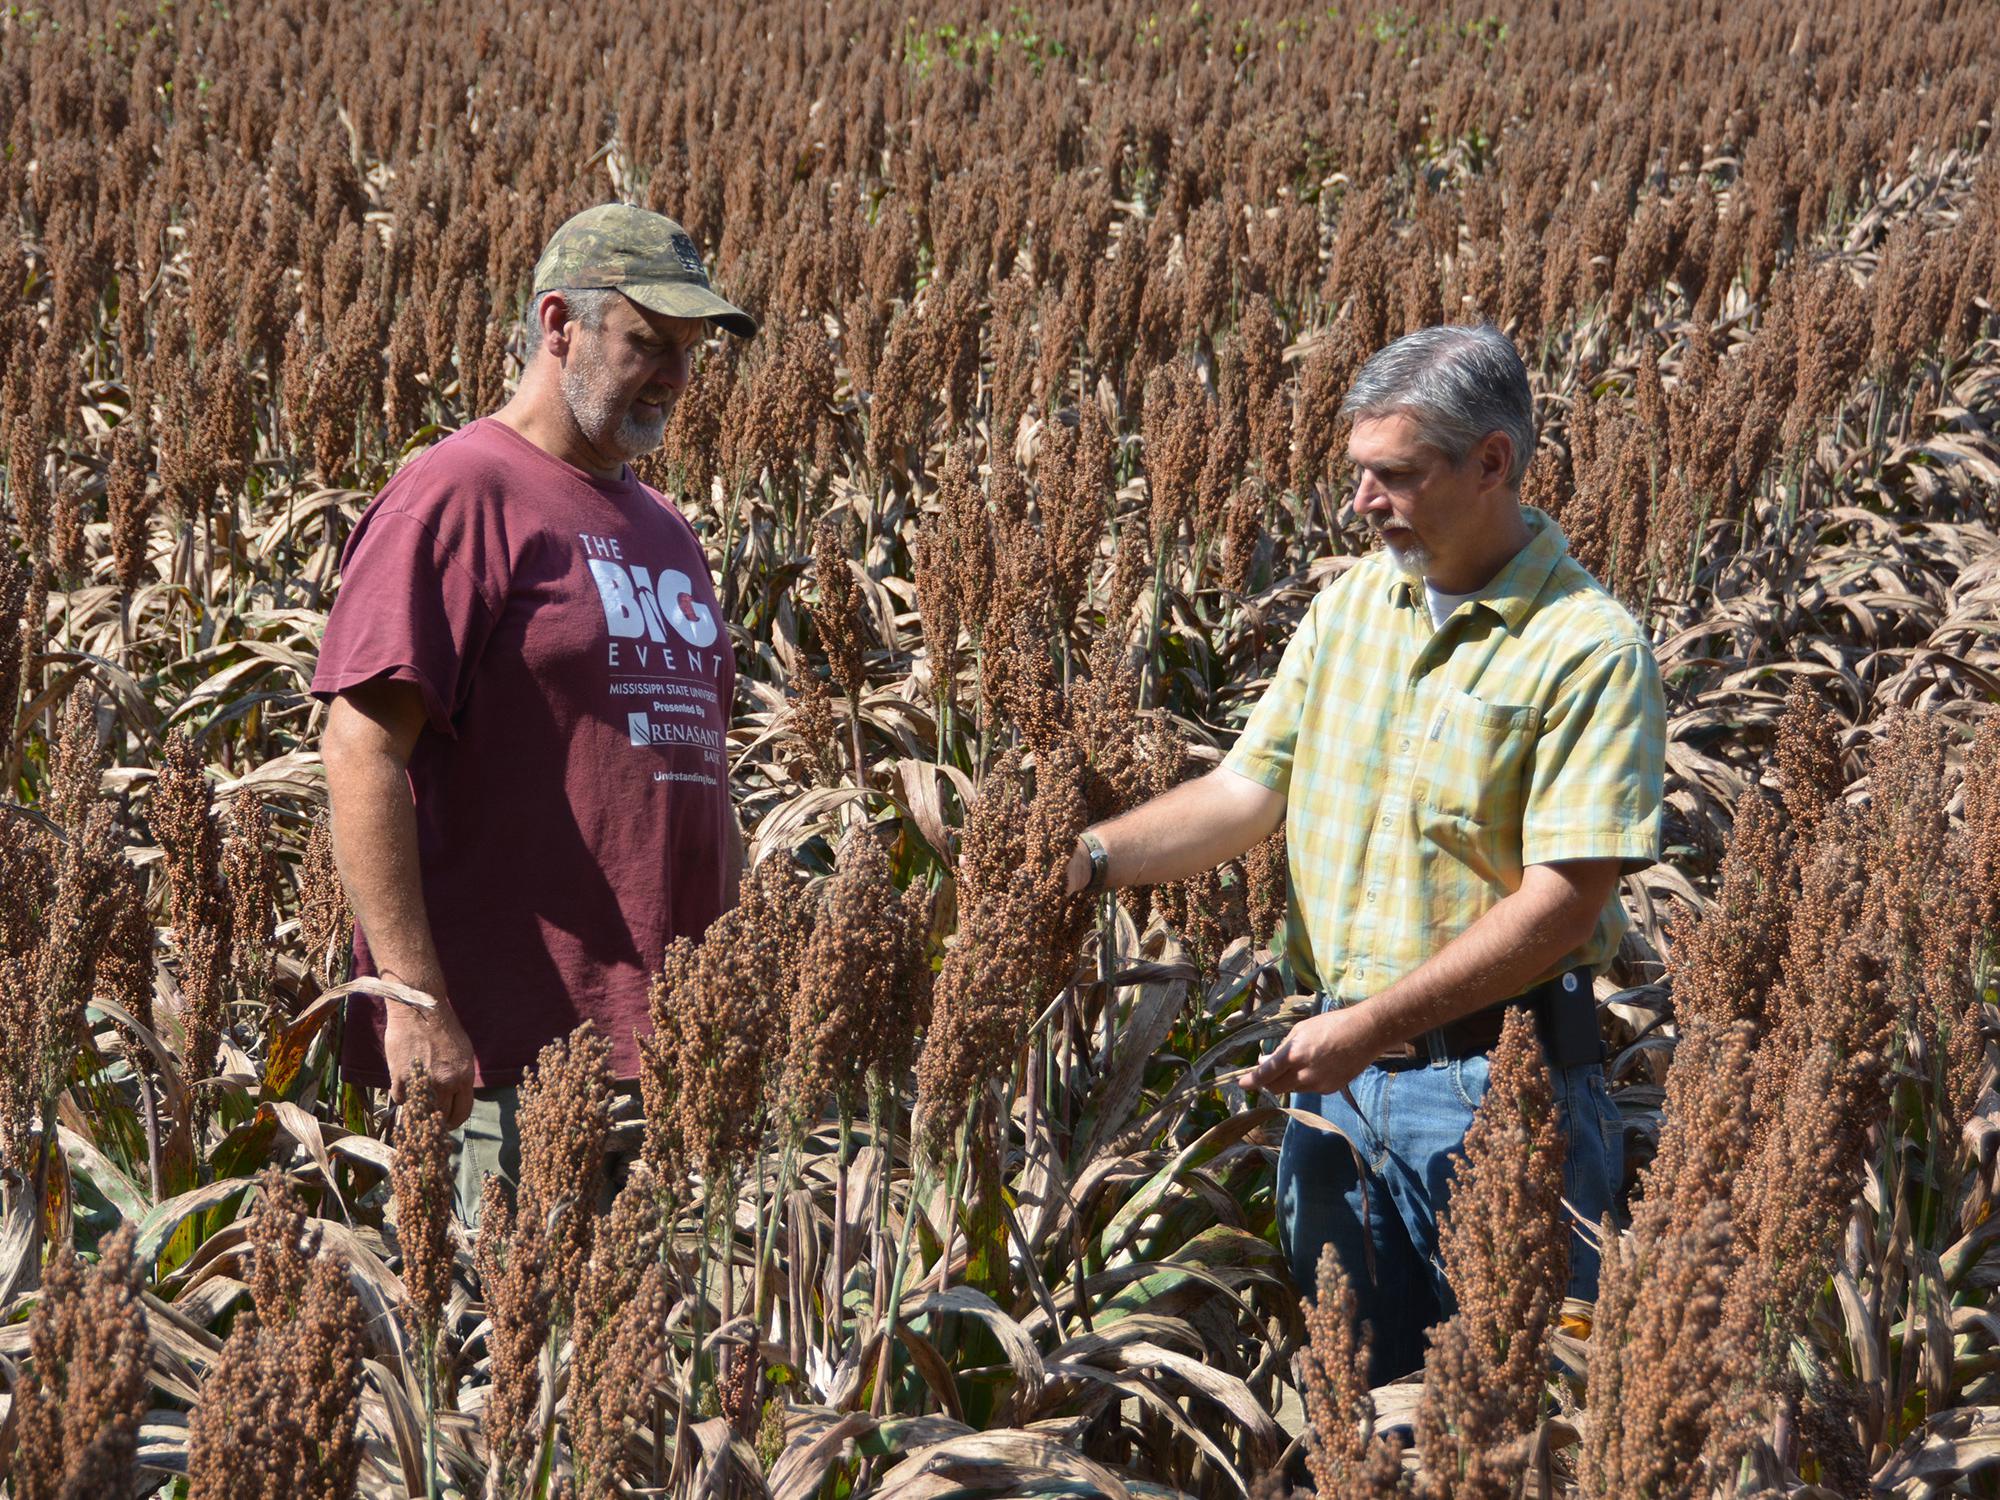 Eddie Stevens, supervisor for the R.R. Foil Plant Science Research Center at Mississippi State University, left, and Erick Larson, an associate research/extension professor, examine grain sorghum in a herbicide study in fields on the north side of campus on Sept. 24, 2015. (Photo by MSU Ag Communications/Linda Breazeale)